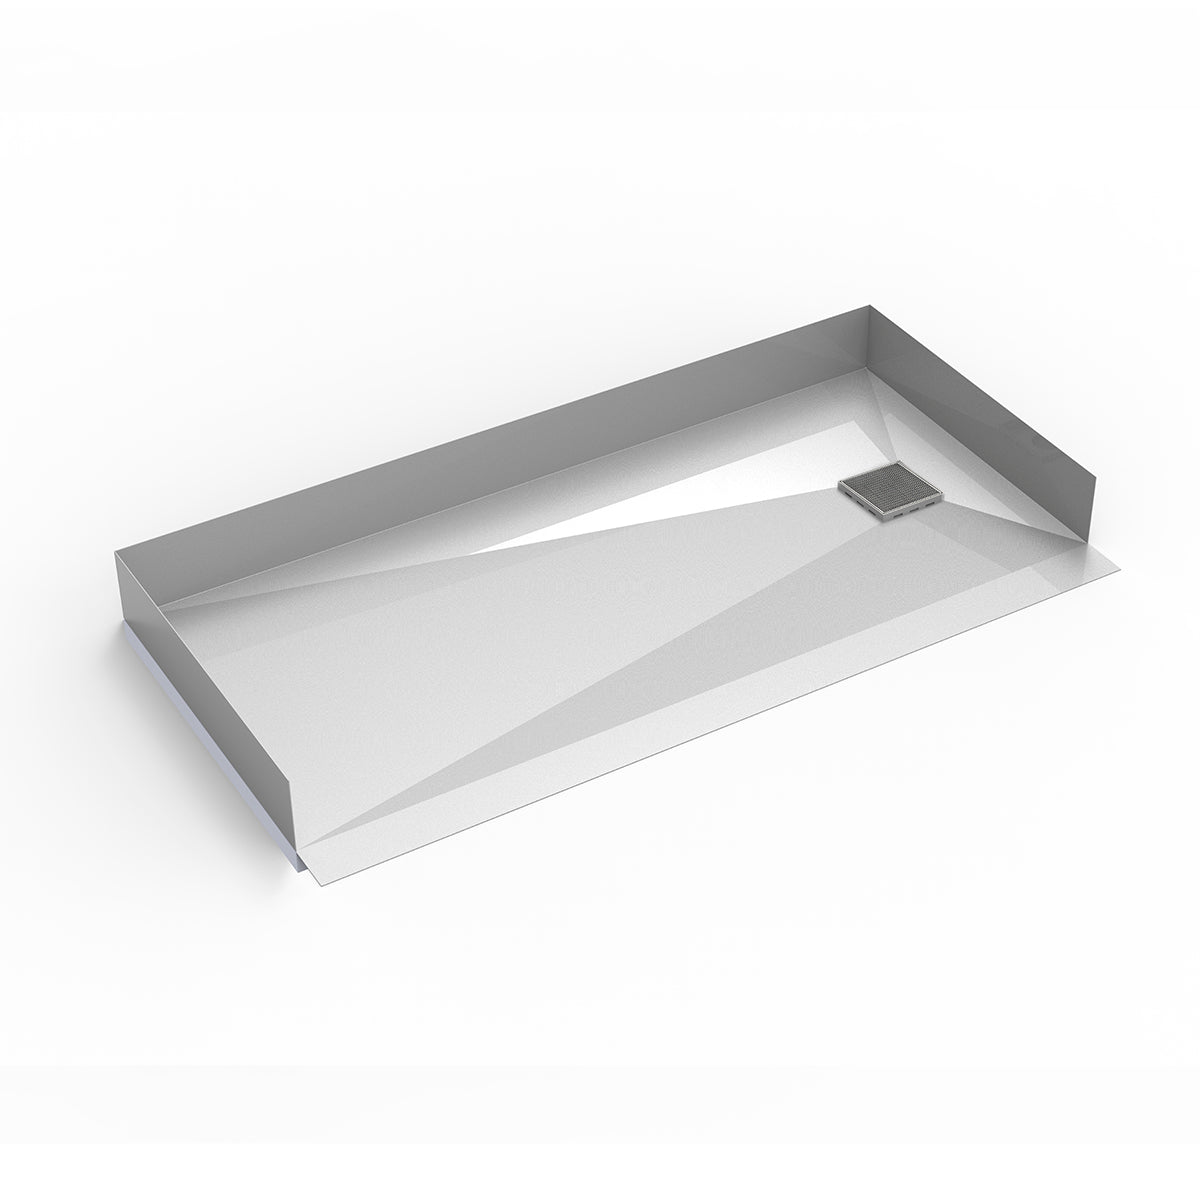 Infinity Drain 30"x 60" Curbless Stainless Steel Shower Base with Wedge Wire Right Drain location